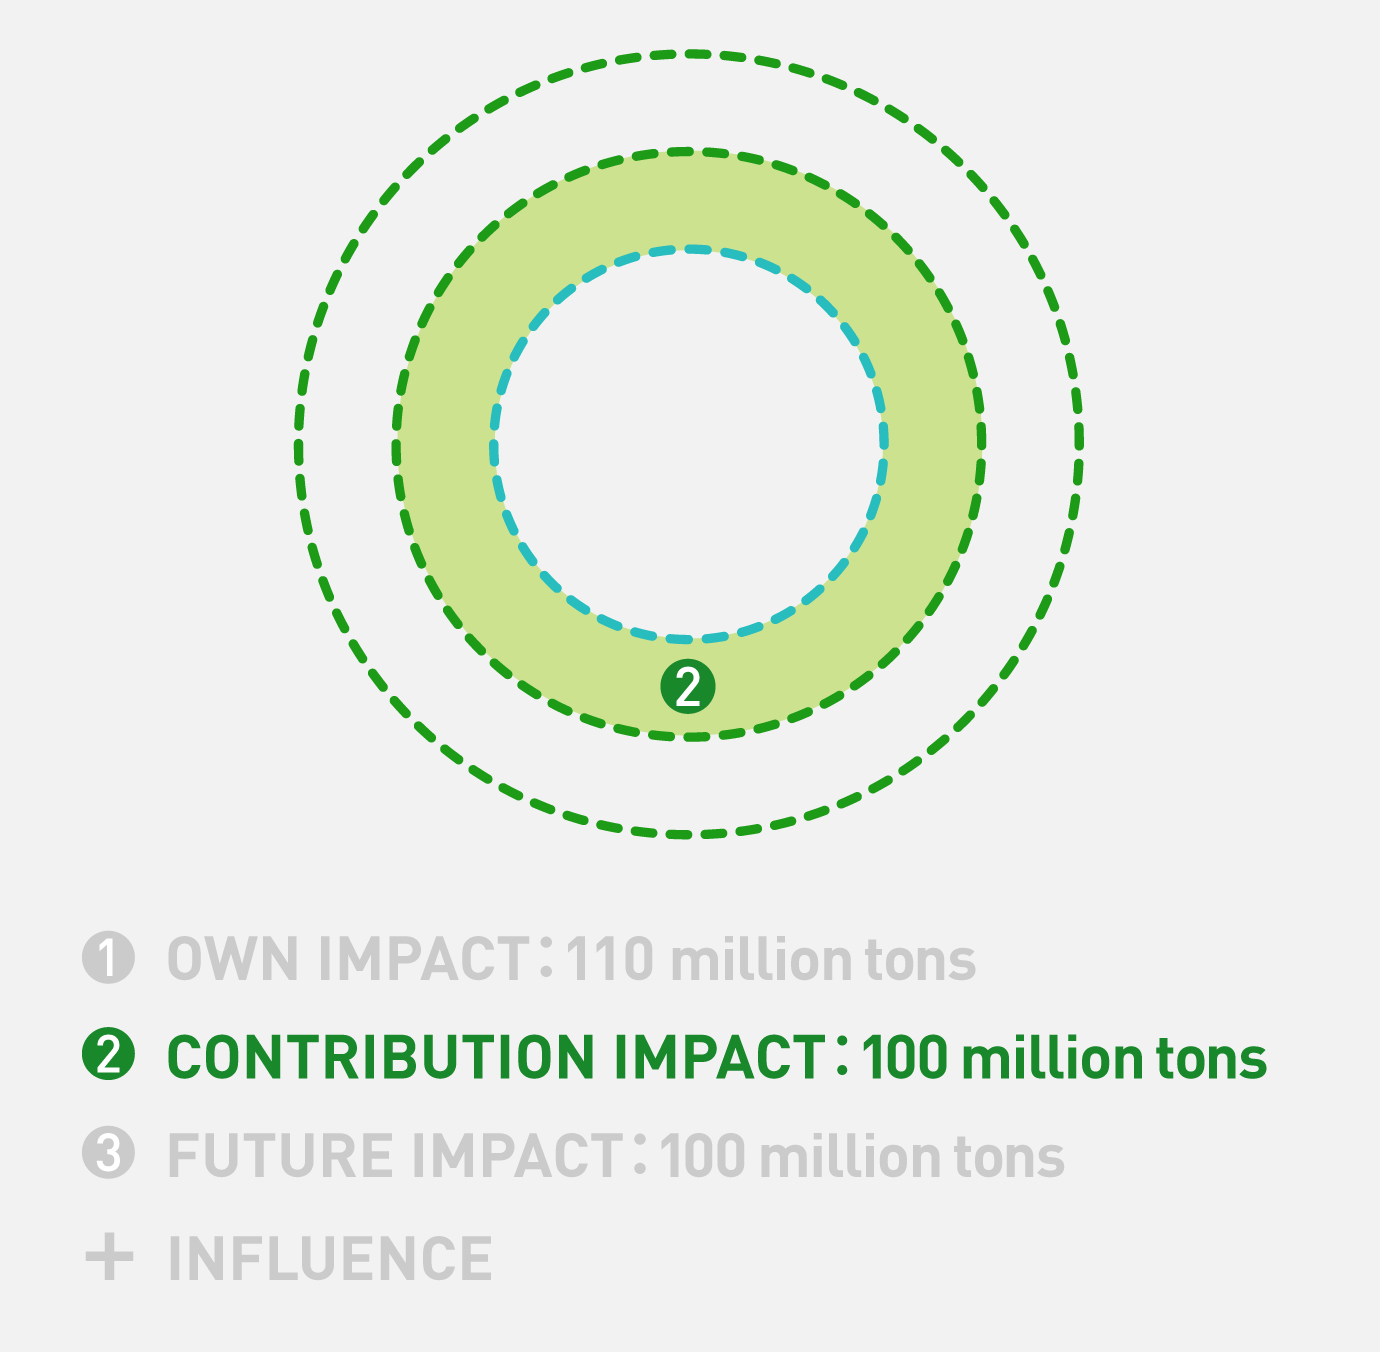 Conceptual diagram illustrating the area of Panasonic's own value chain in carbon neutrality affected by Panasonic GREEN IMPACT. Among the three concentric circles, the second circle from the center is filled with color. In CONTRIBUTION IMPACT, we contribute to reducing CO2 emissions by over 100 million tons in existing businesses.